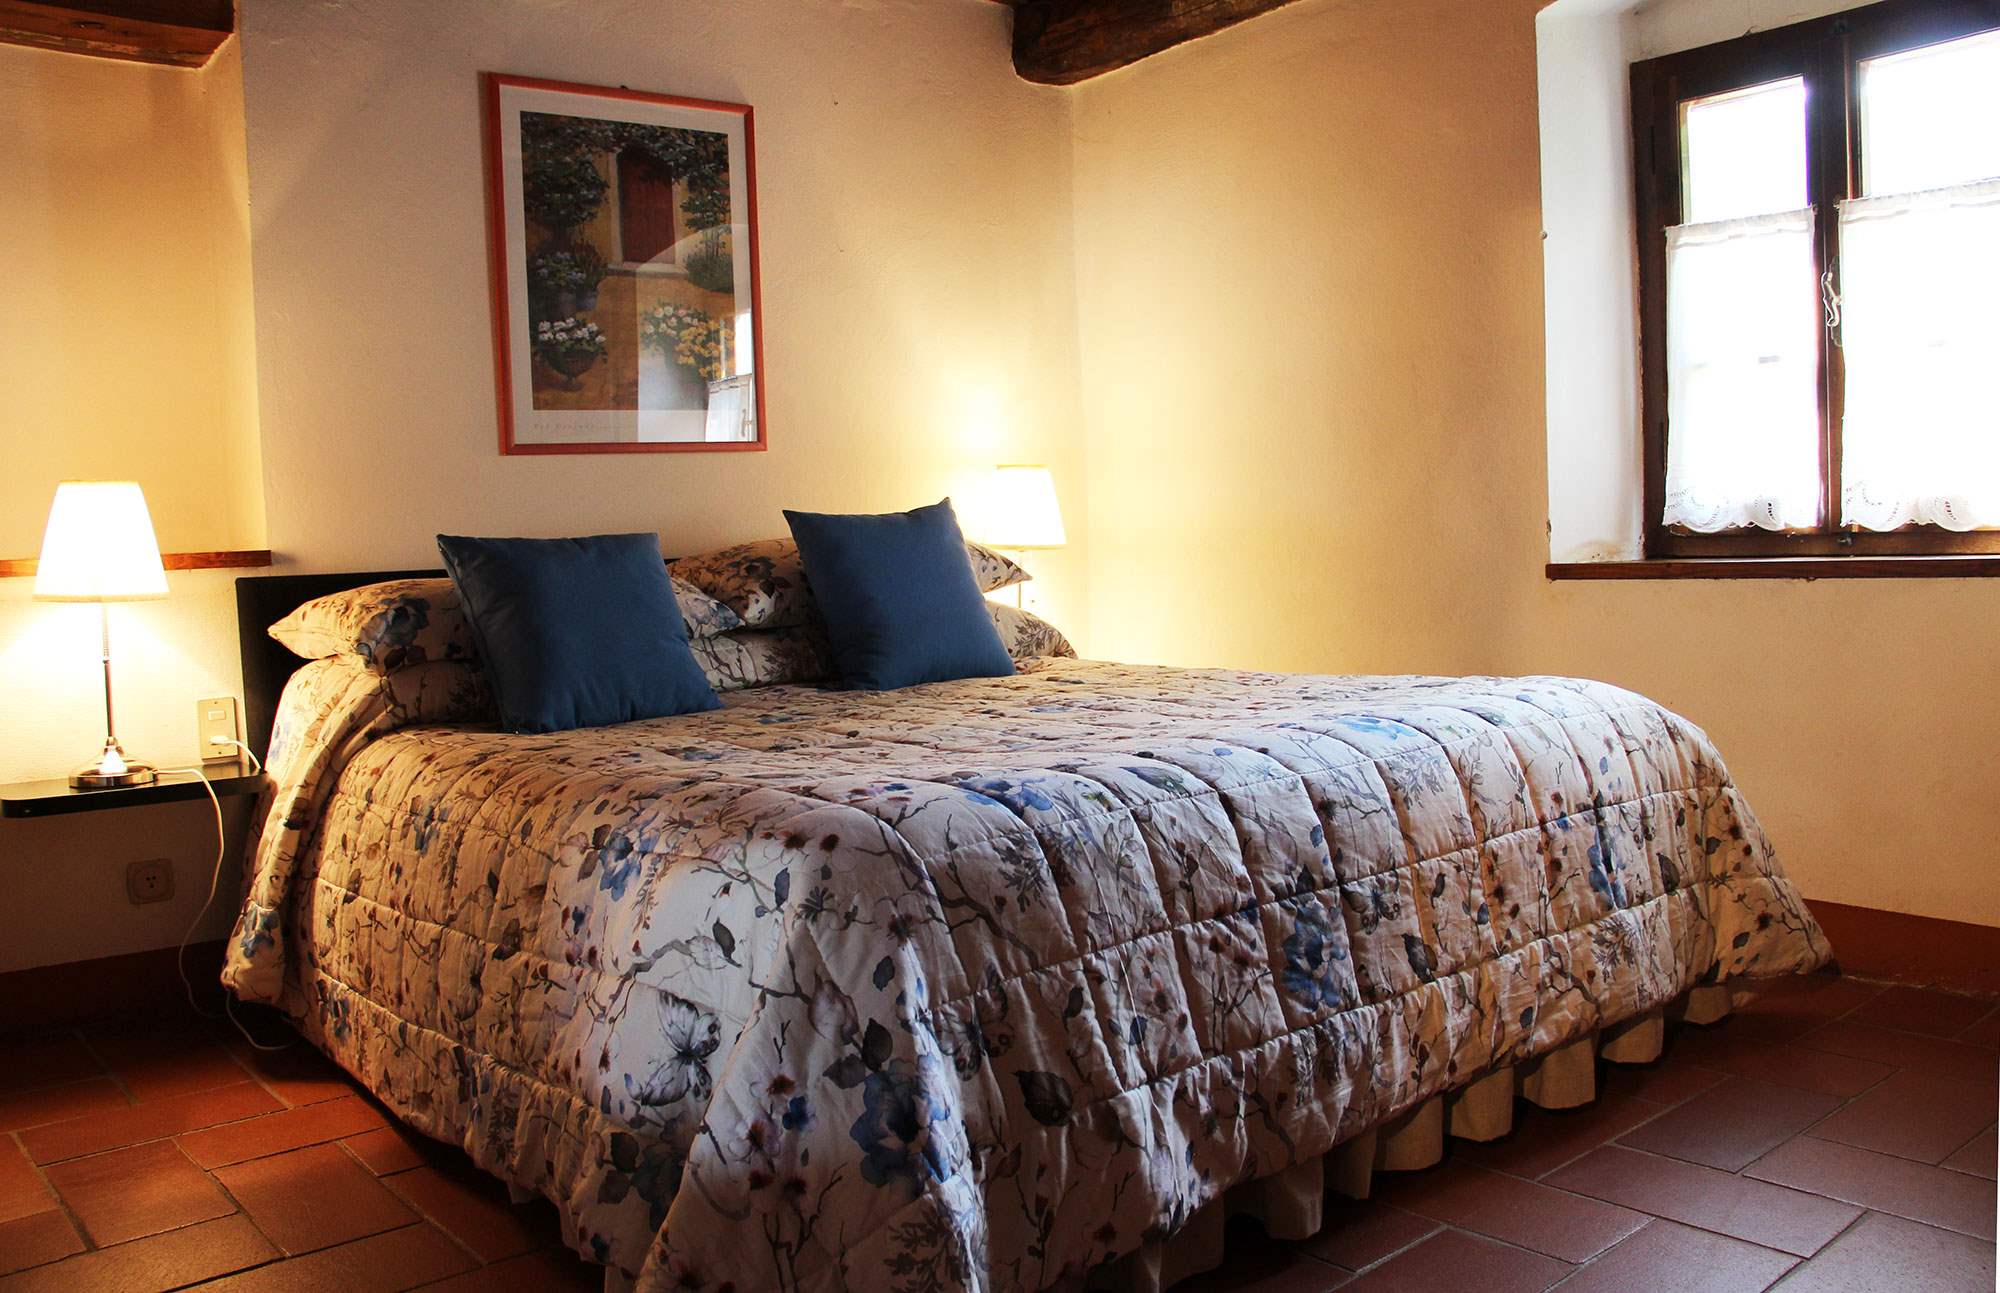 Villa Felicita, Main house and apartment, 10 persons rate, 5 bedroom villa in Chianti & Countryside, Tuscany Photo #27